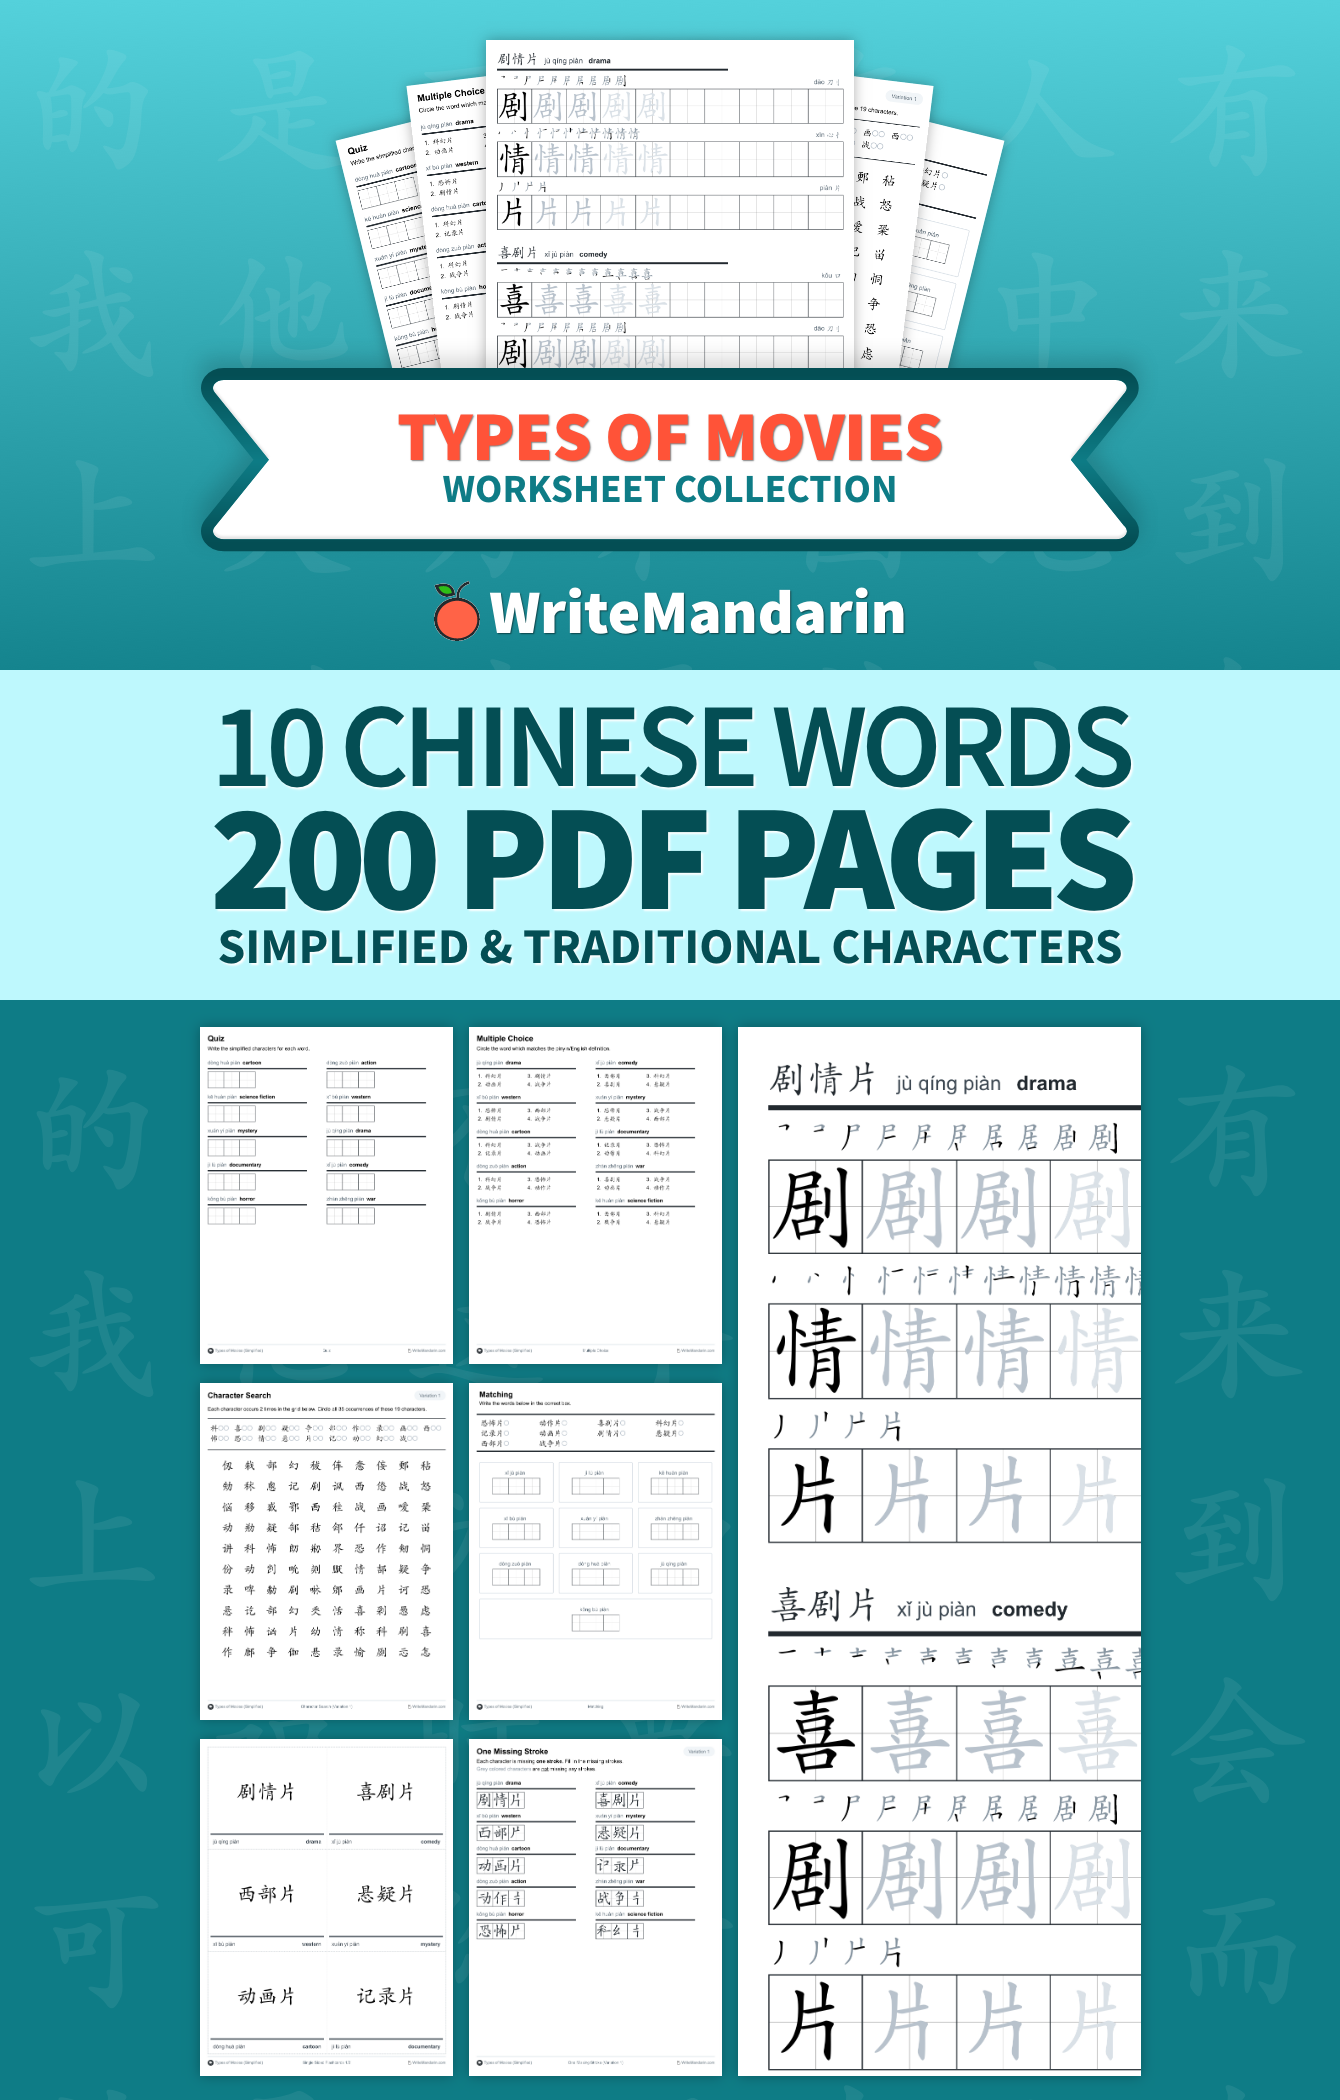 Preview image of Types of Movies worksheet collection